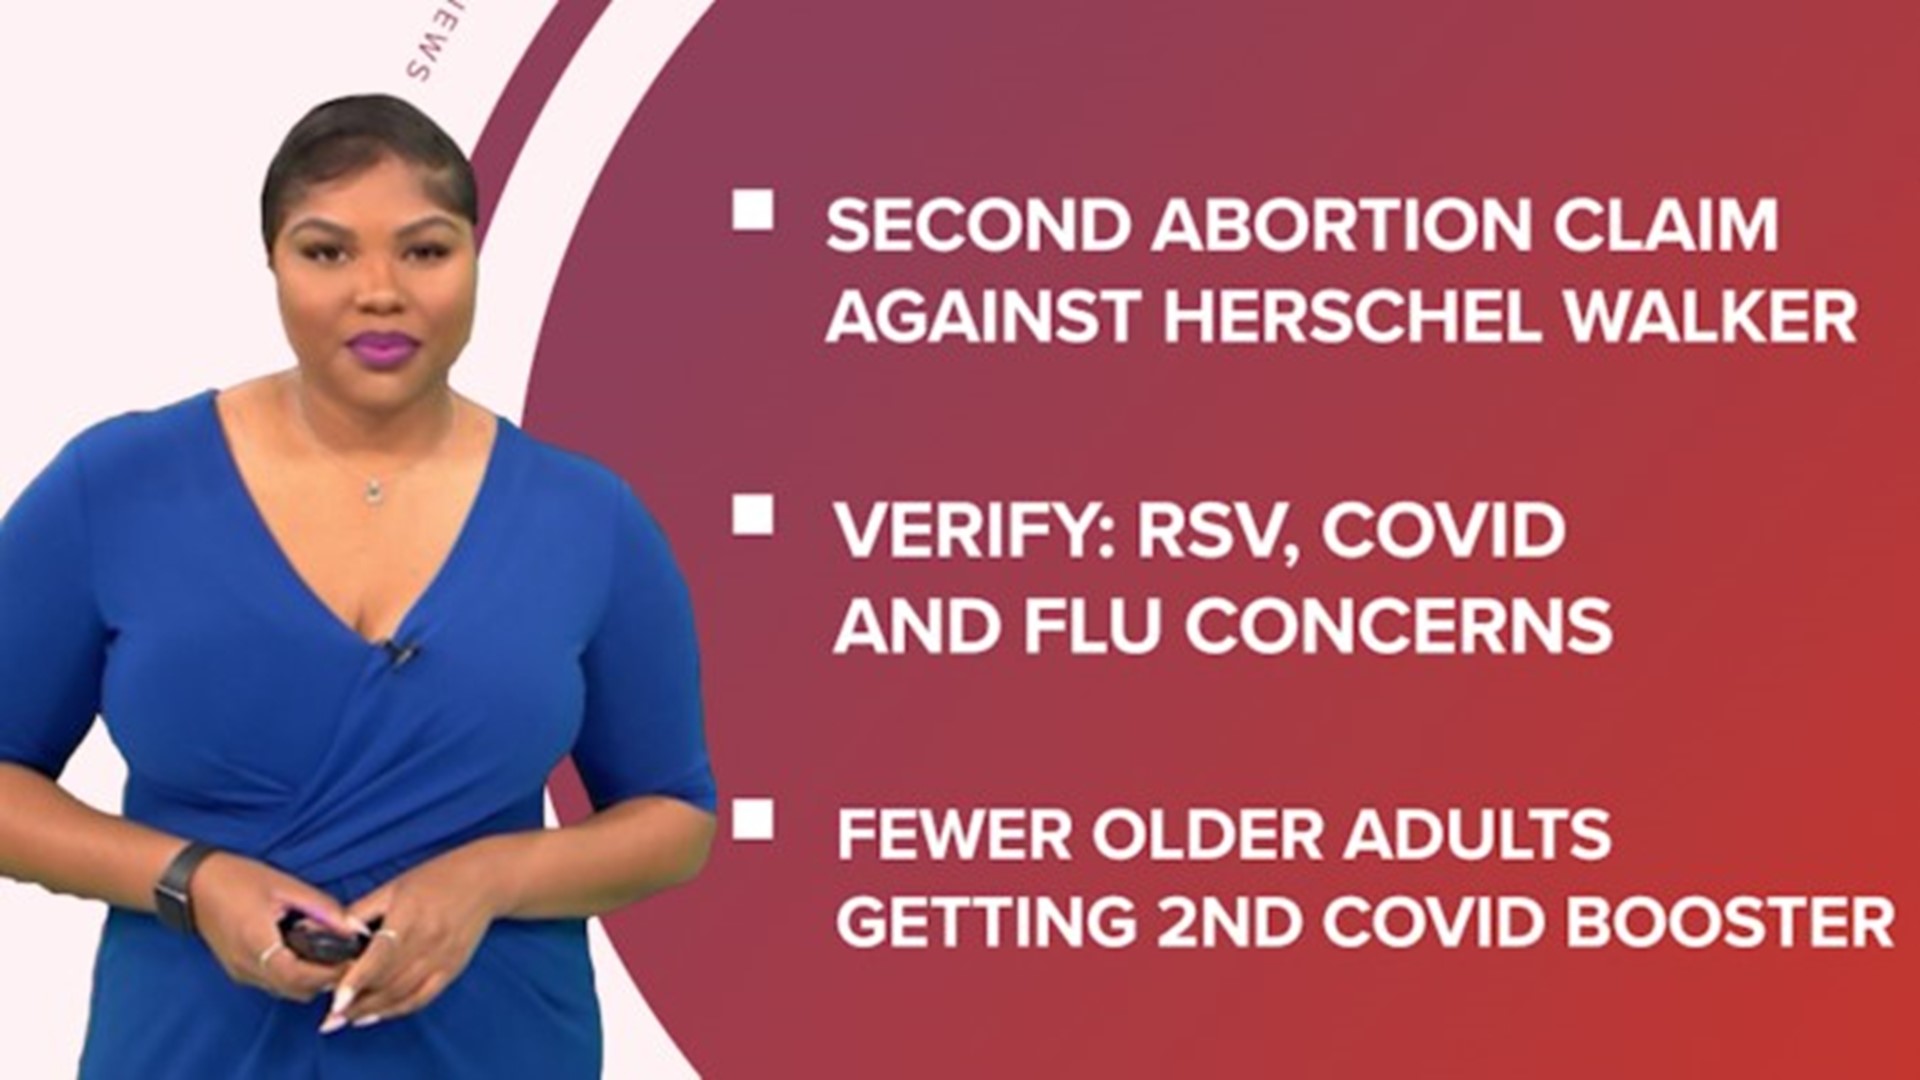 A look at what is happening in the news from a second abortion claim against Herschel Walker to more questions answered on COVID boosters and RSV.